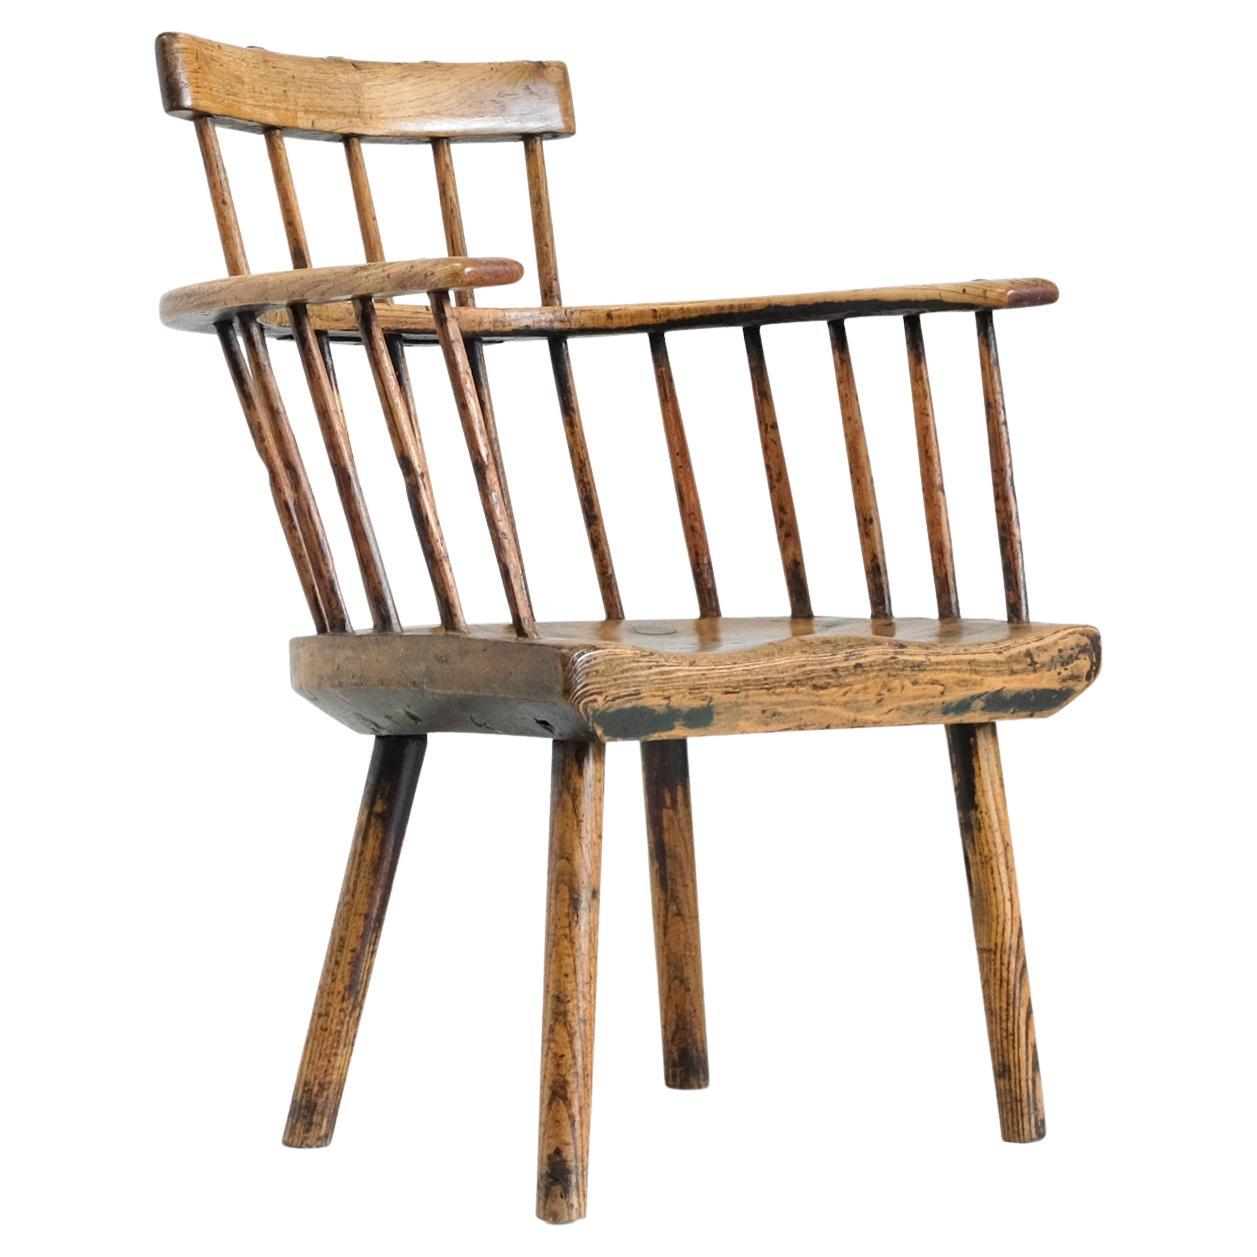 Primitive Welsh Stick Chair, Vernacular Windsor, Country Armchair